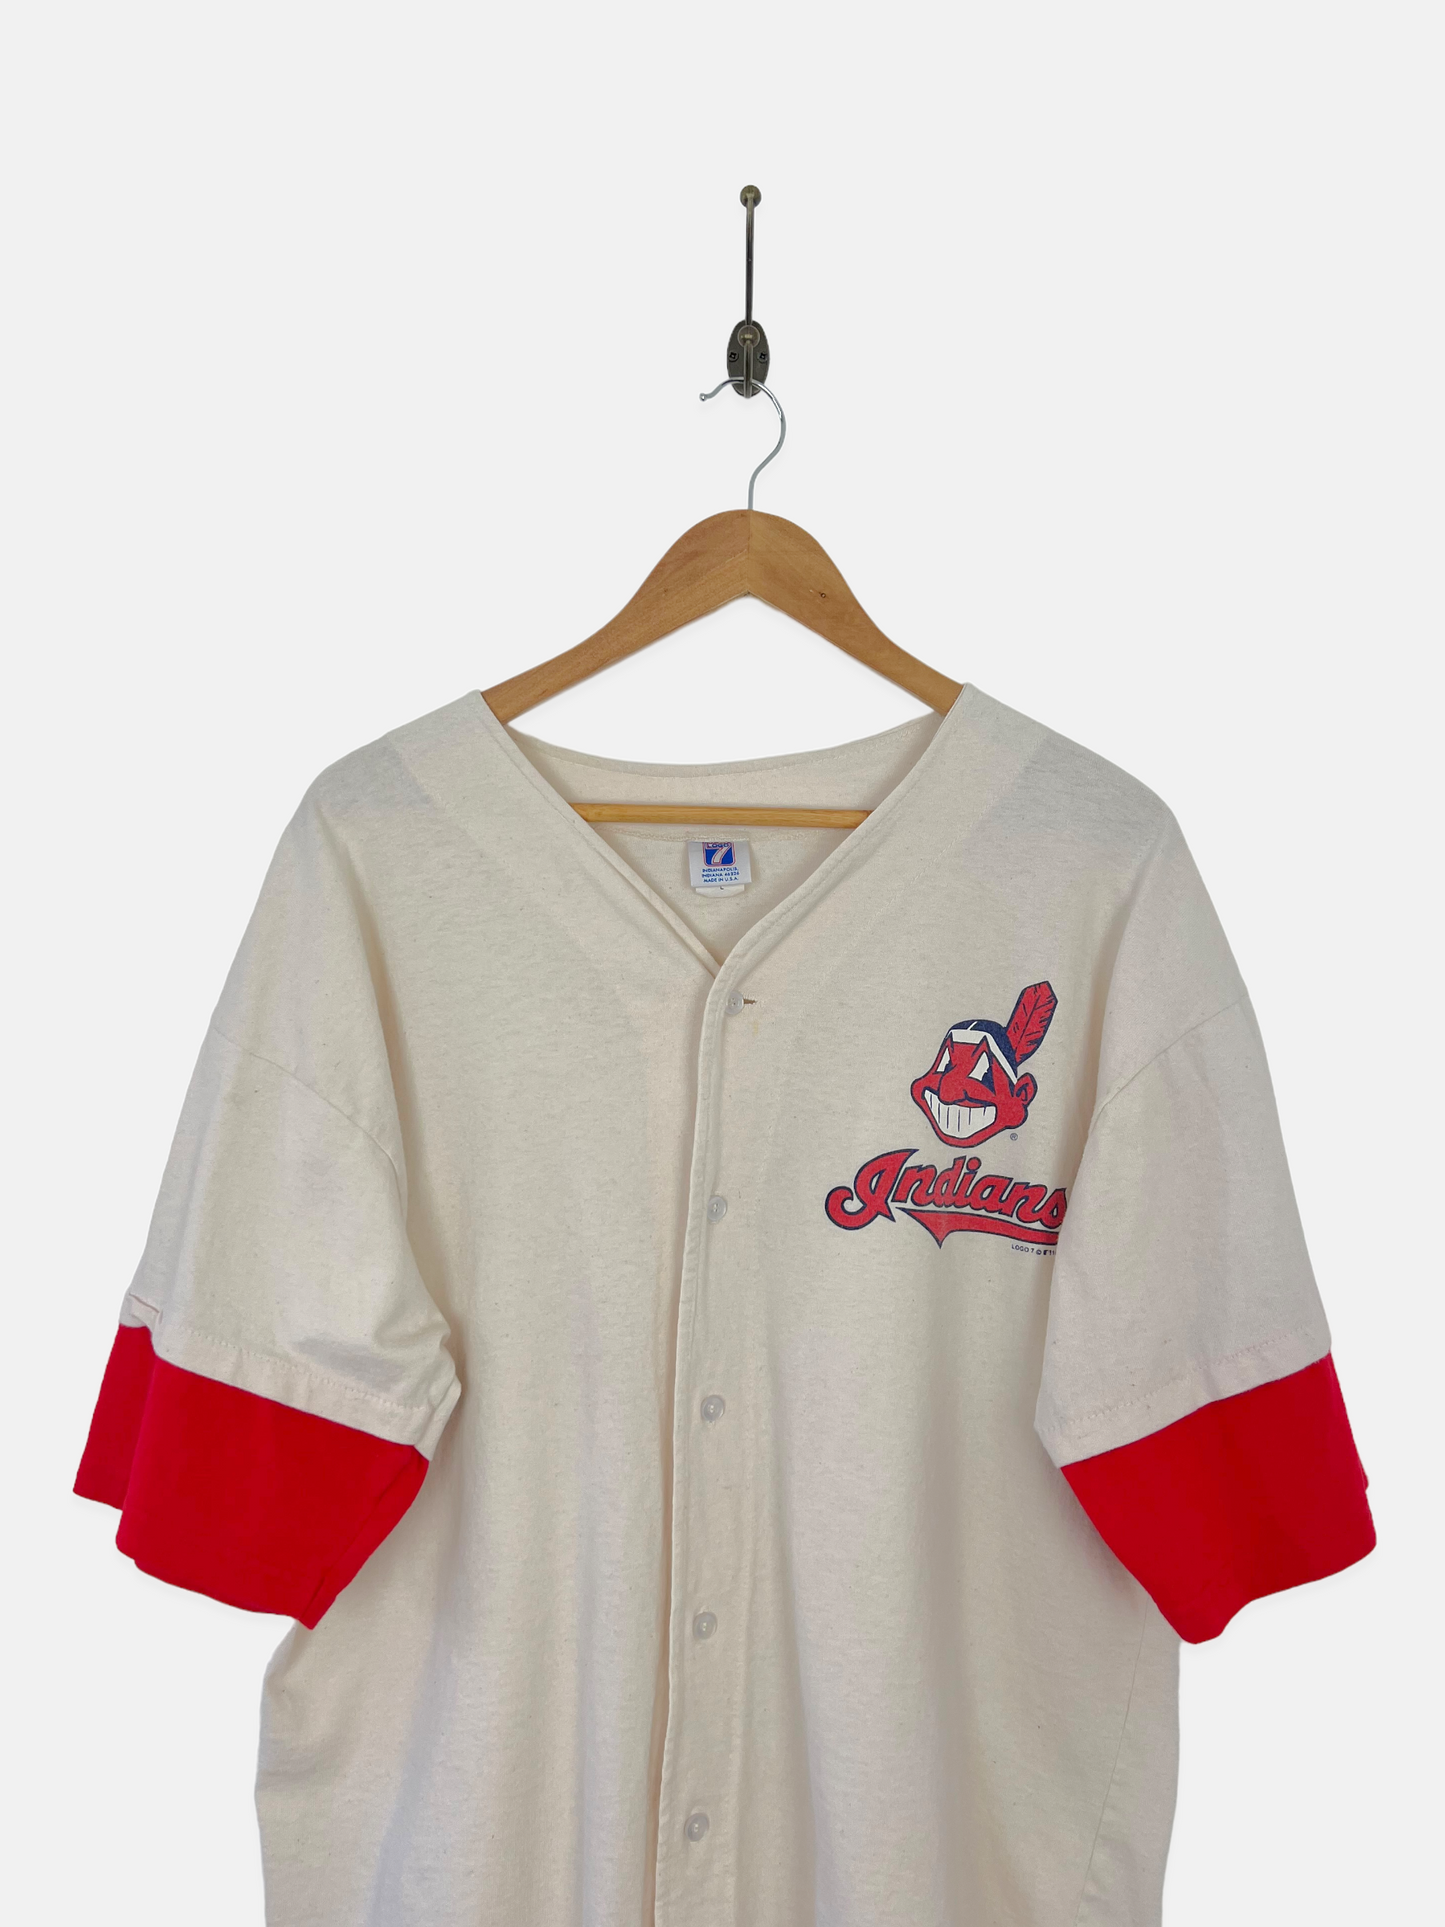 Vintage MLB Cleveland Indians Jersey Size Youth M____MADE IN USA.